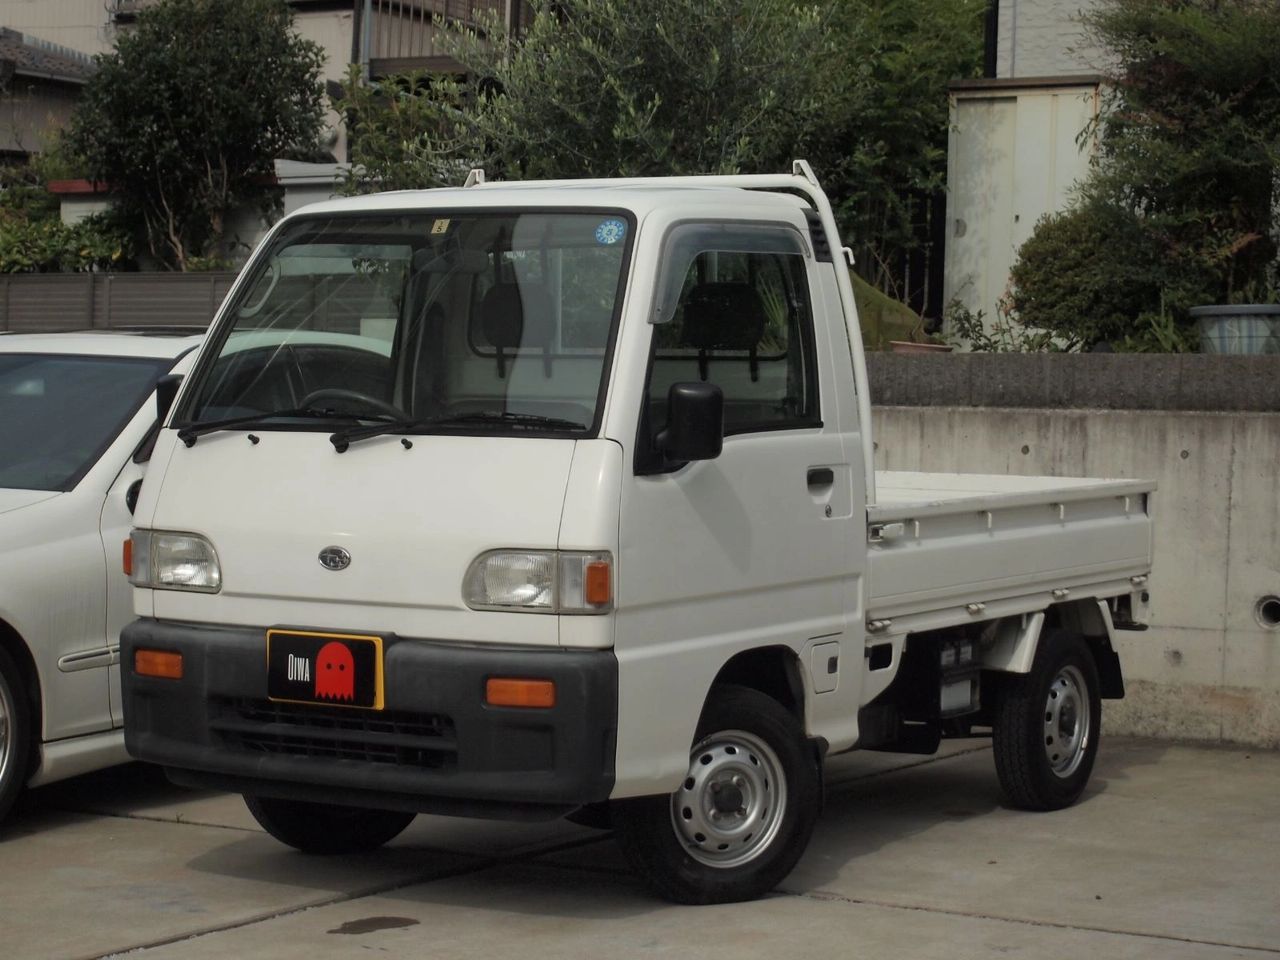 SHOP KEI TRUCKS FOR SALE AT OIWA.CO TODAY!                                                                         CLICK PHOTO